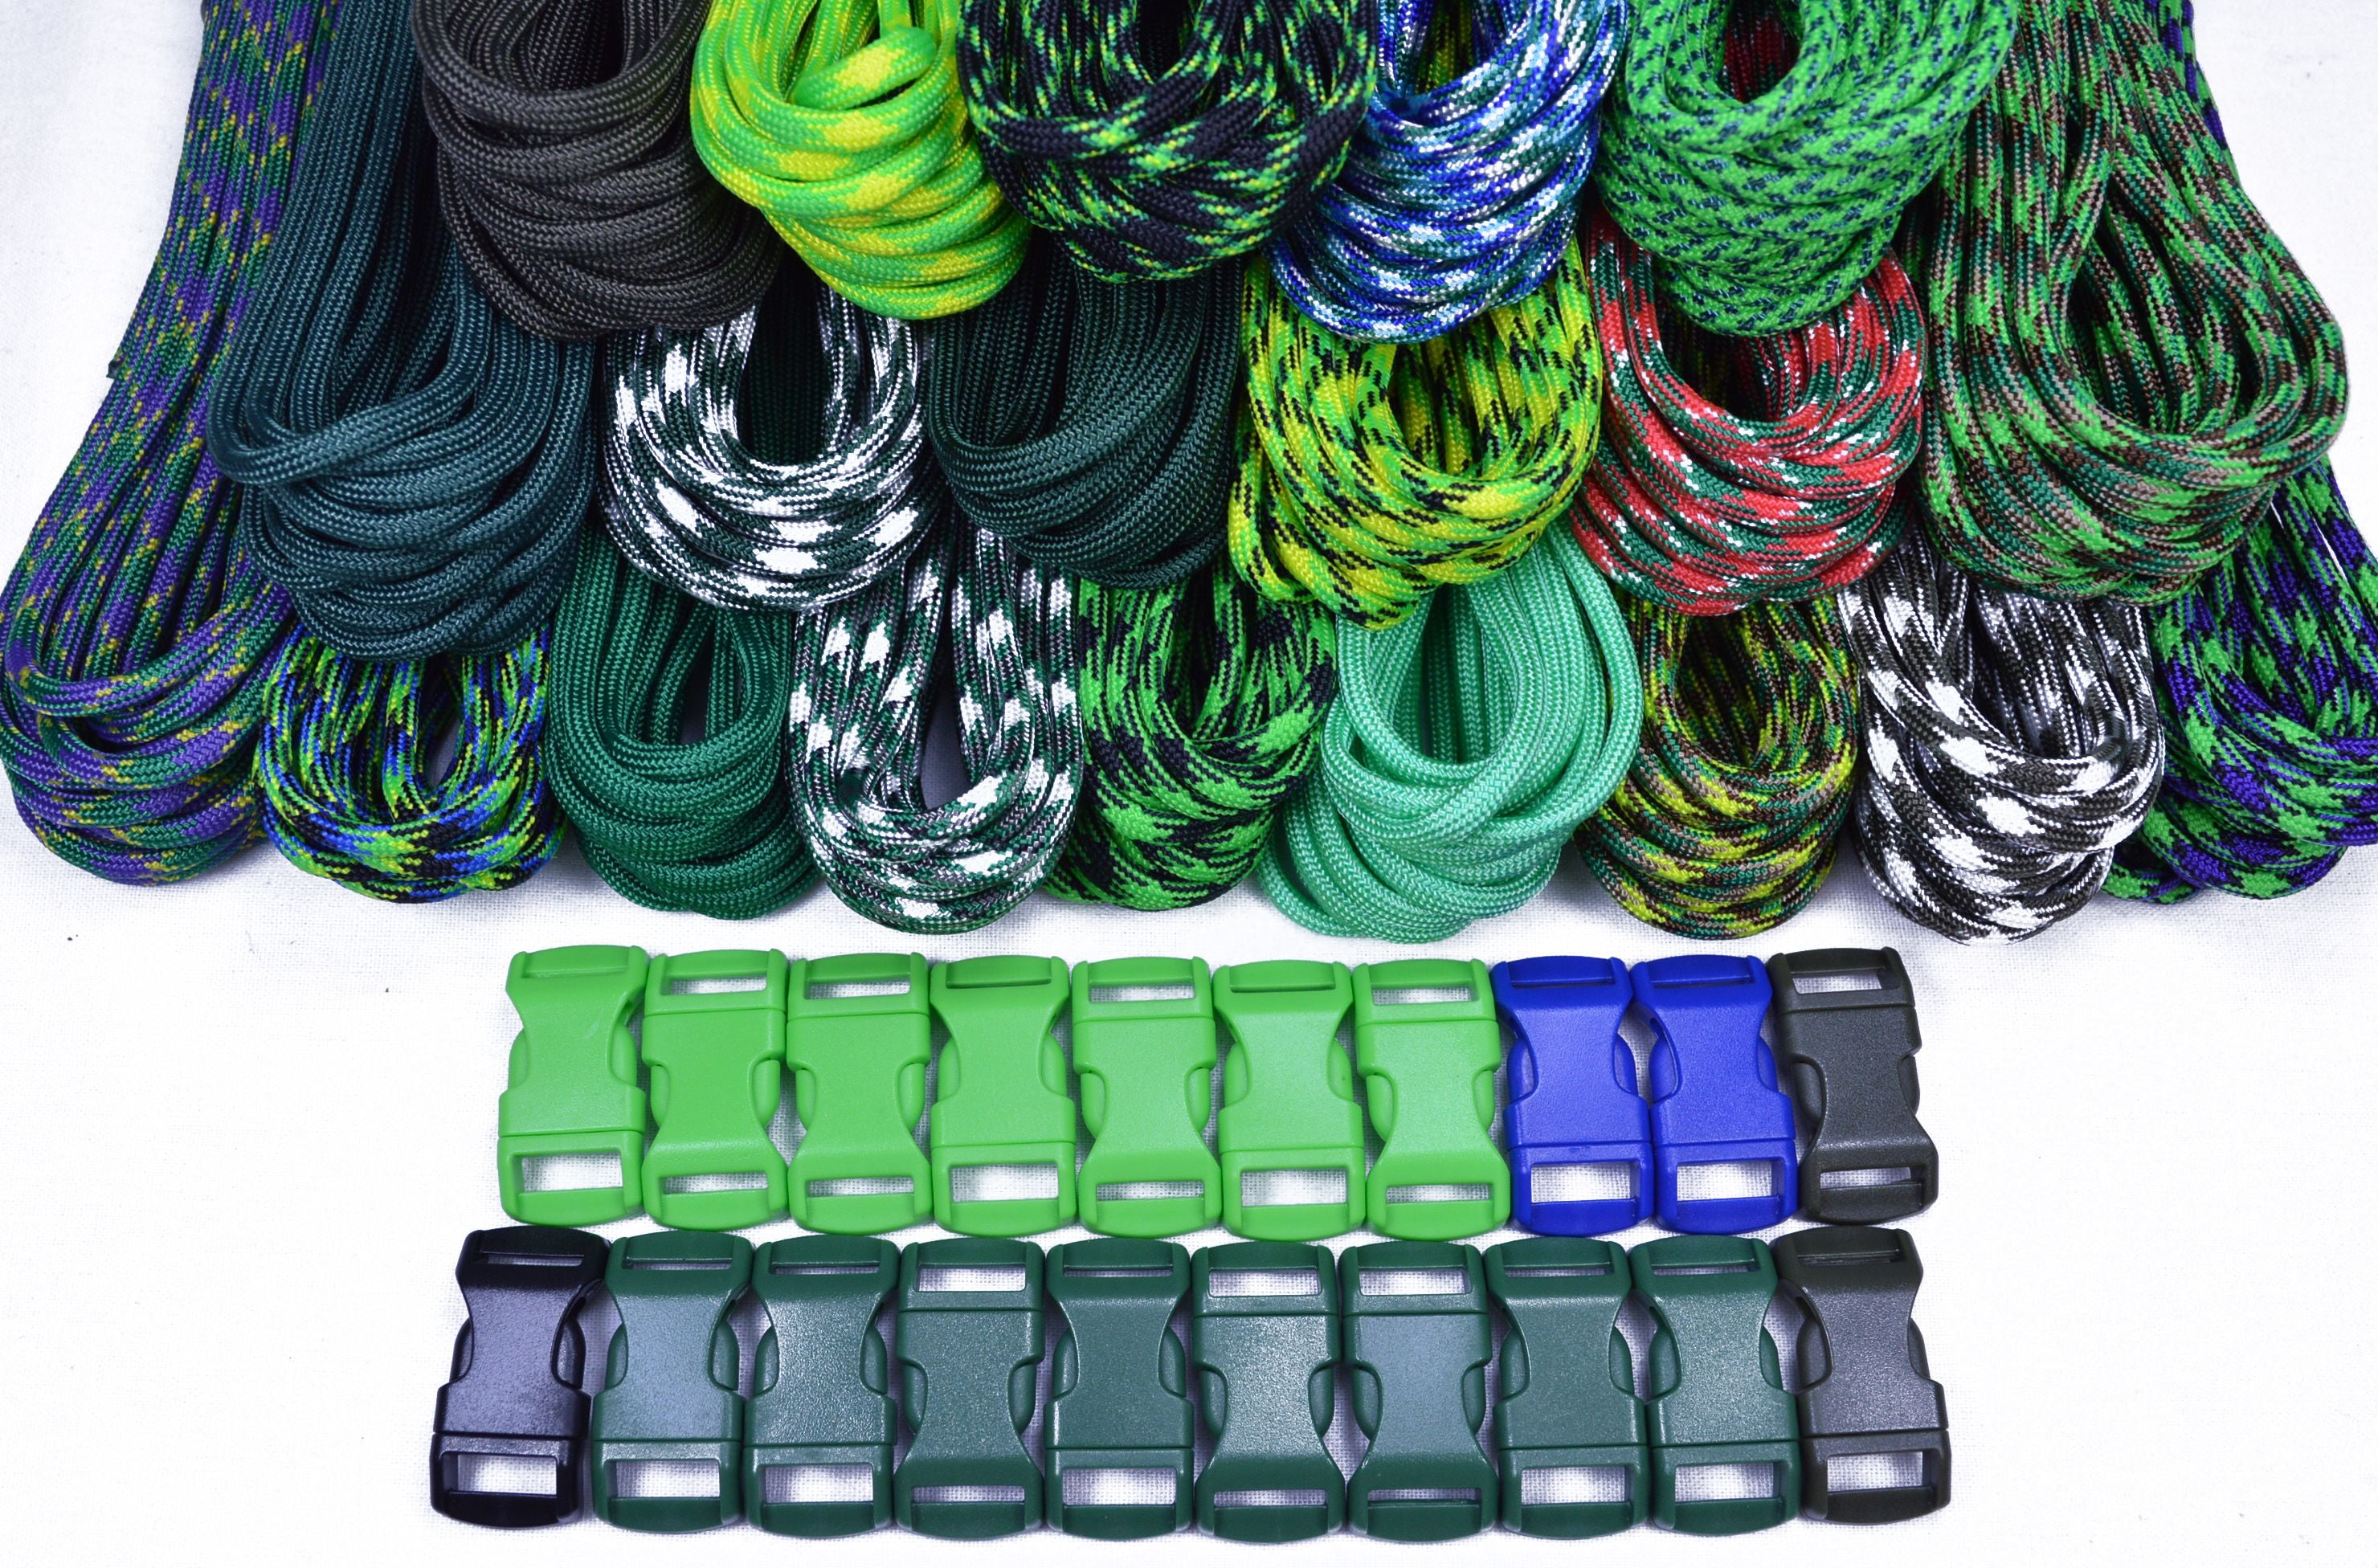  Bored Paracord Brand Paracord Starter Kit - Witch